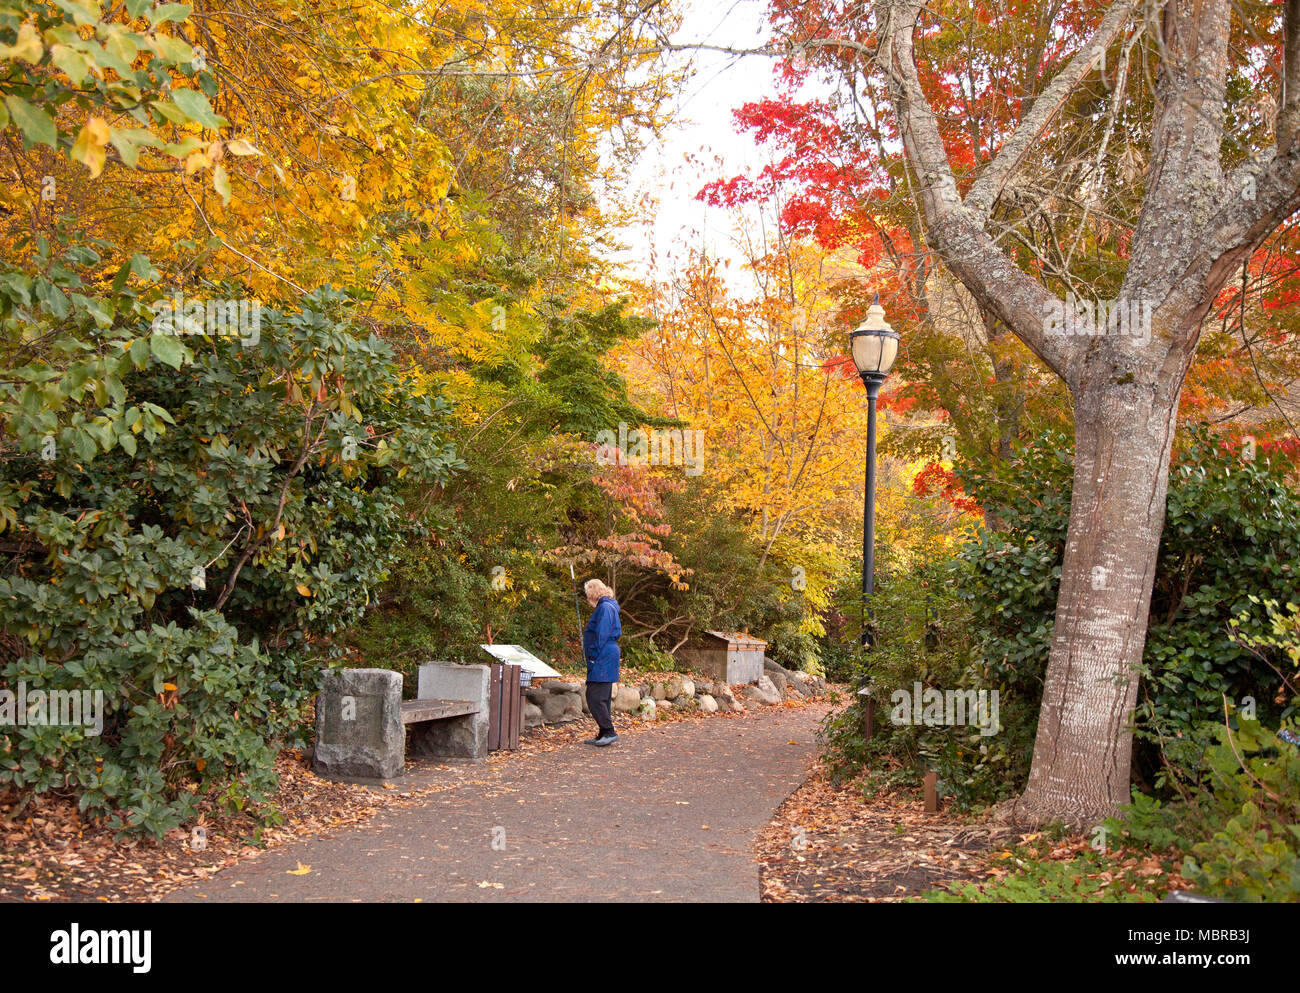 Woman in blue coat stops to read signboard, early morning Fall color, Lithia Park, Ashland, Oregon. Stock Photo